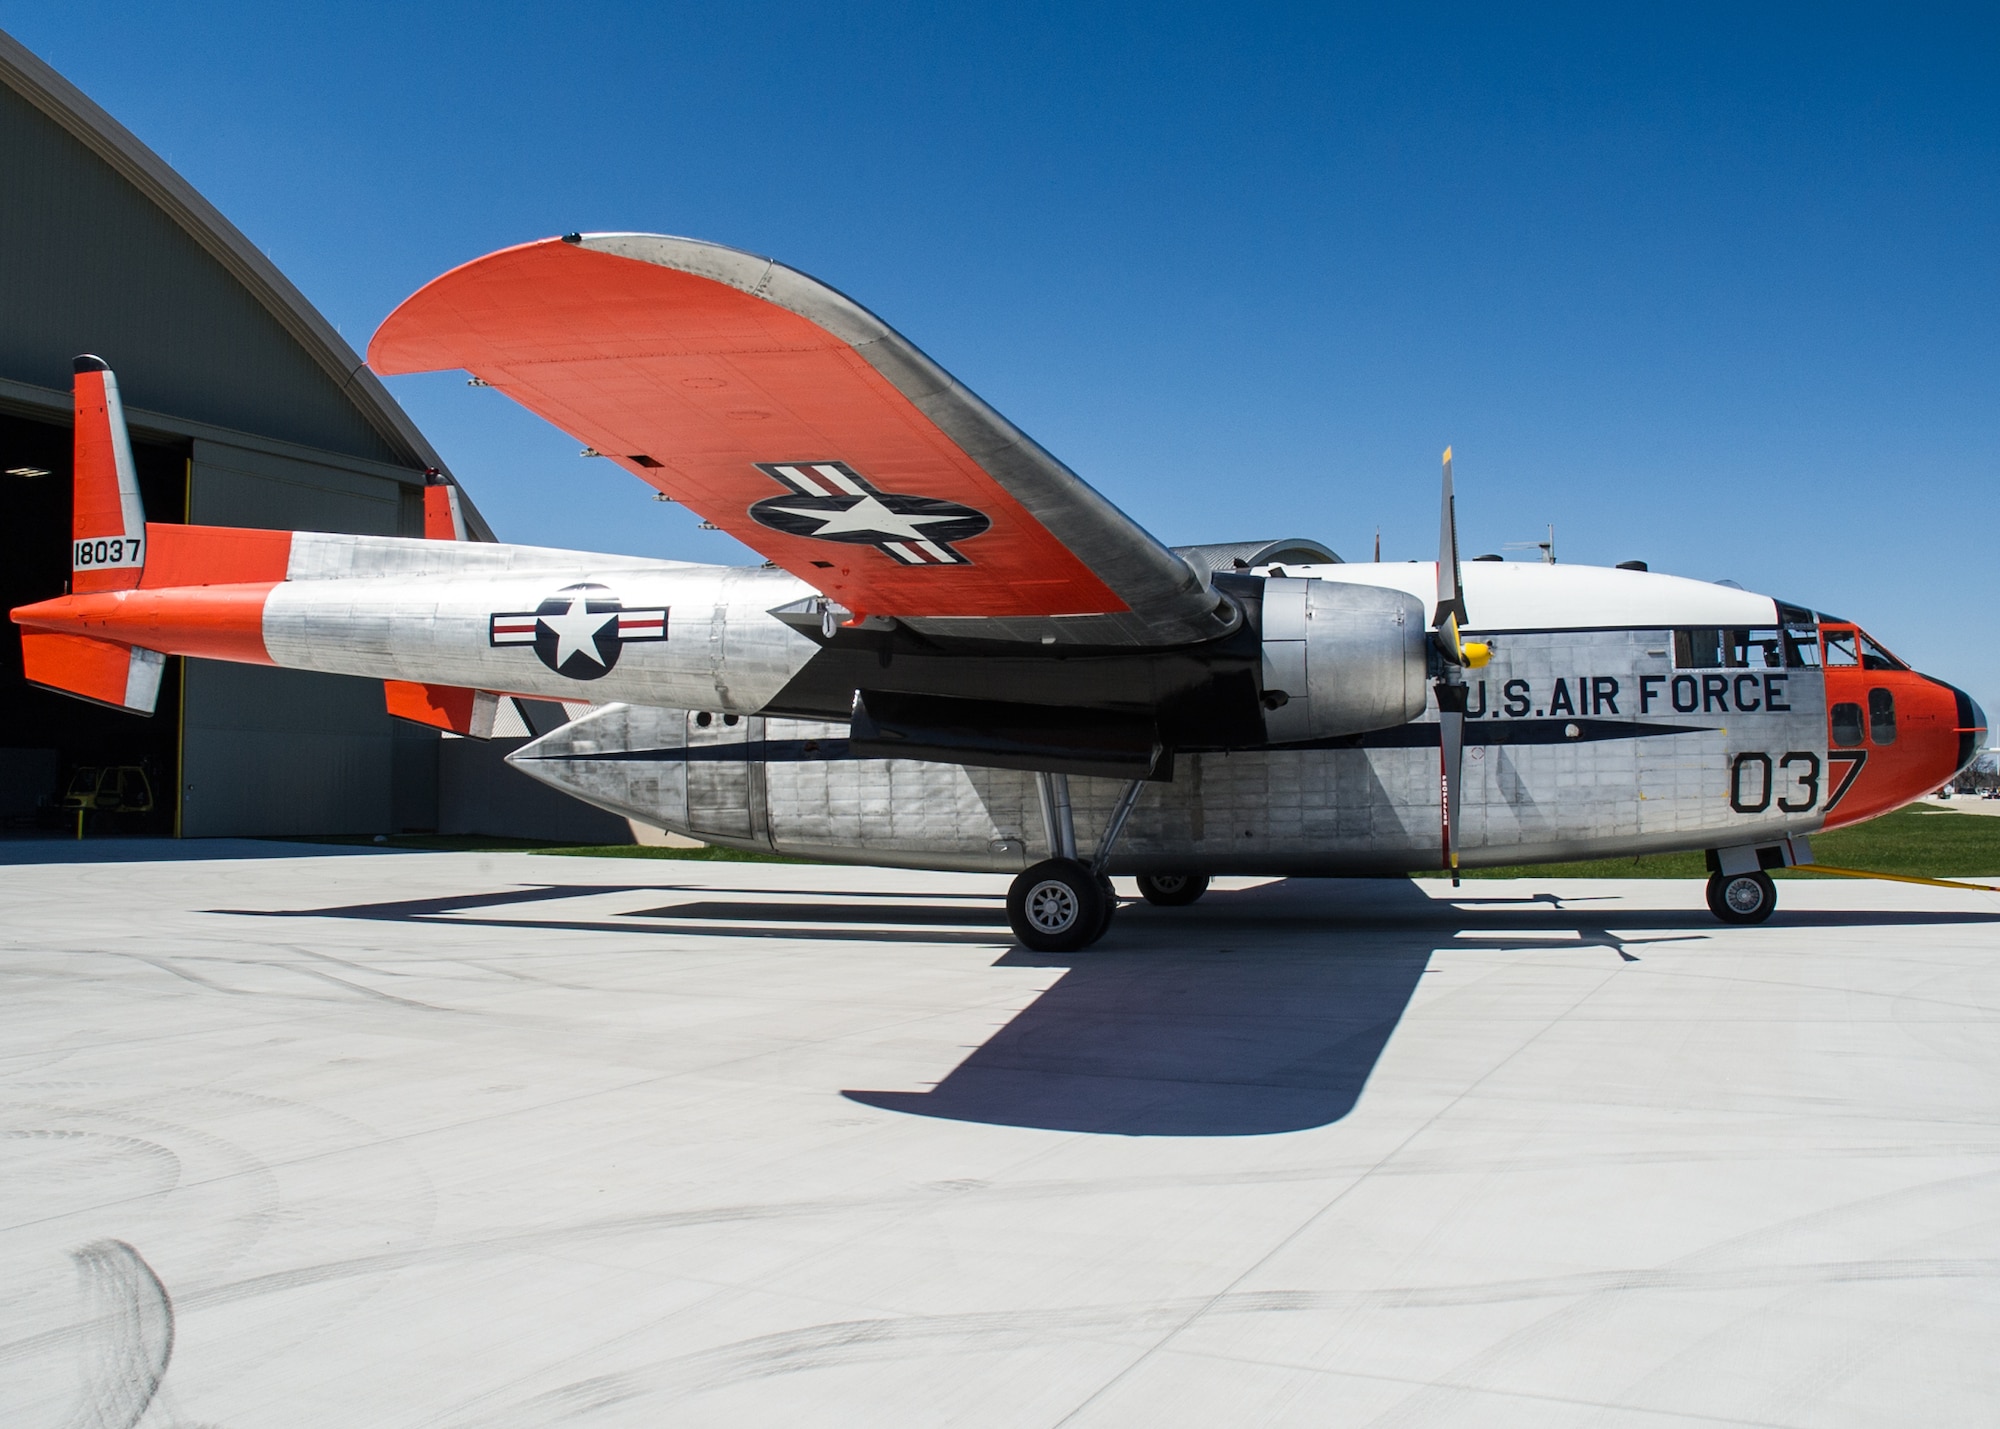 DAYTON, Ohio -- Fairchild C-119J Flying Boxcar at the National Museum of the United States Air Force. (U.S. Air Force photo by Ken LaRock)